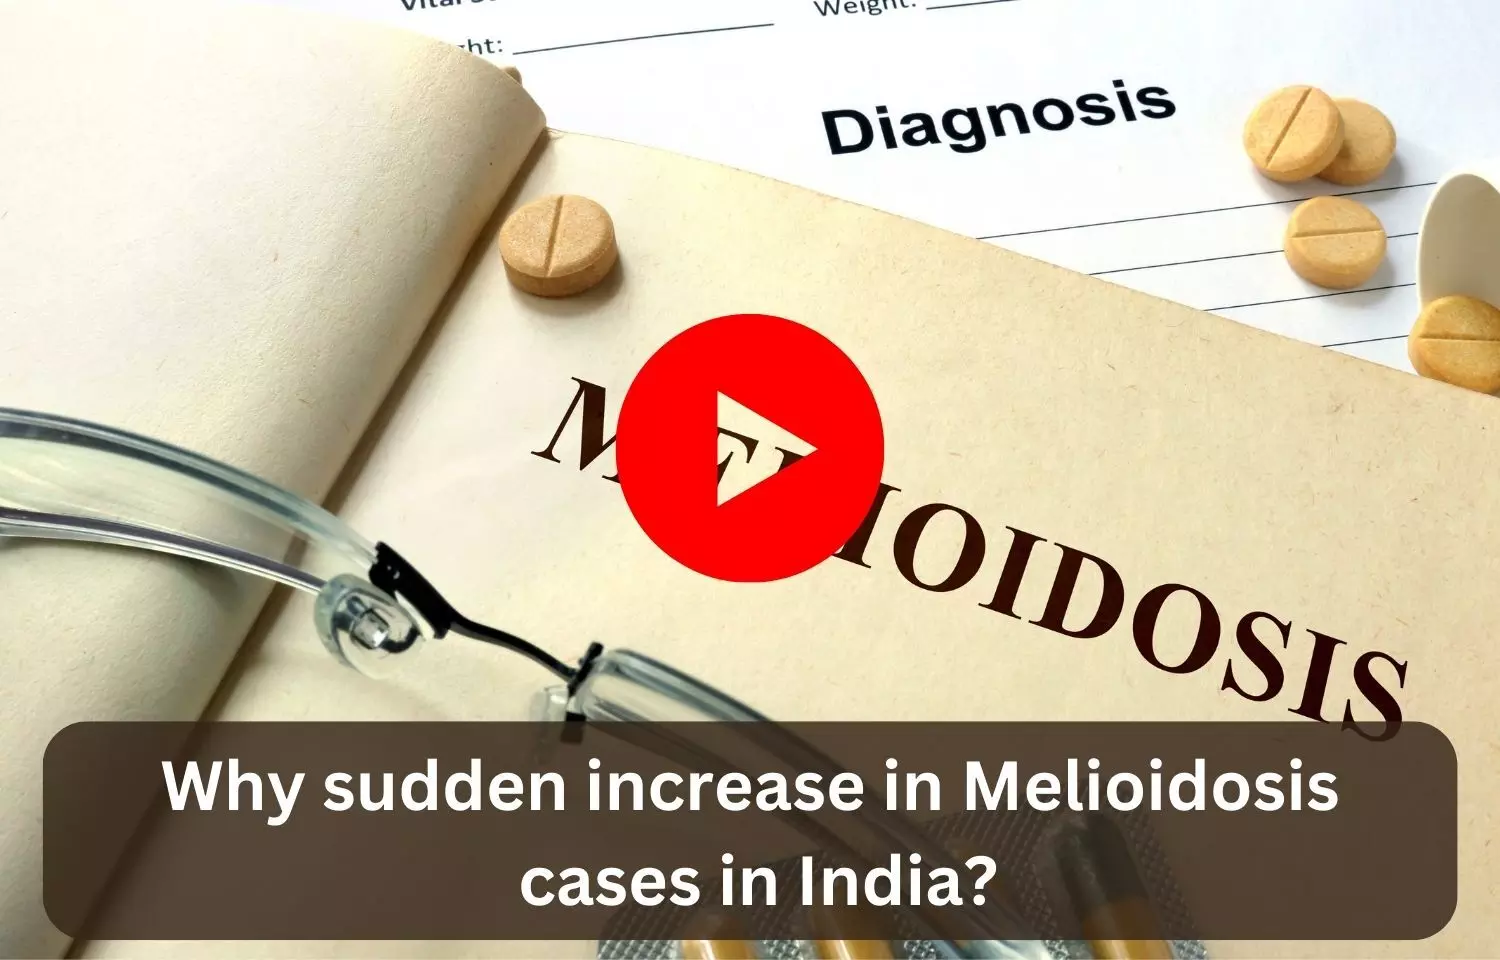 Why sudden increase in Melioidosis cases in India?